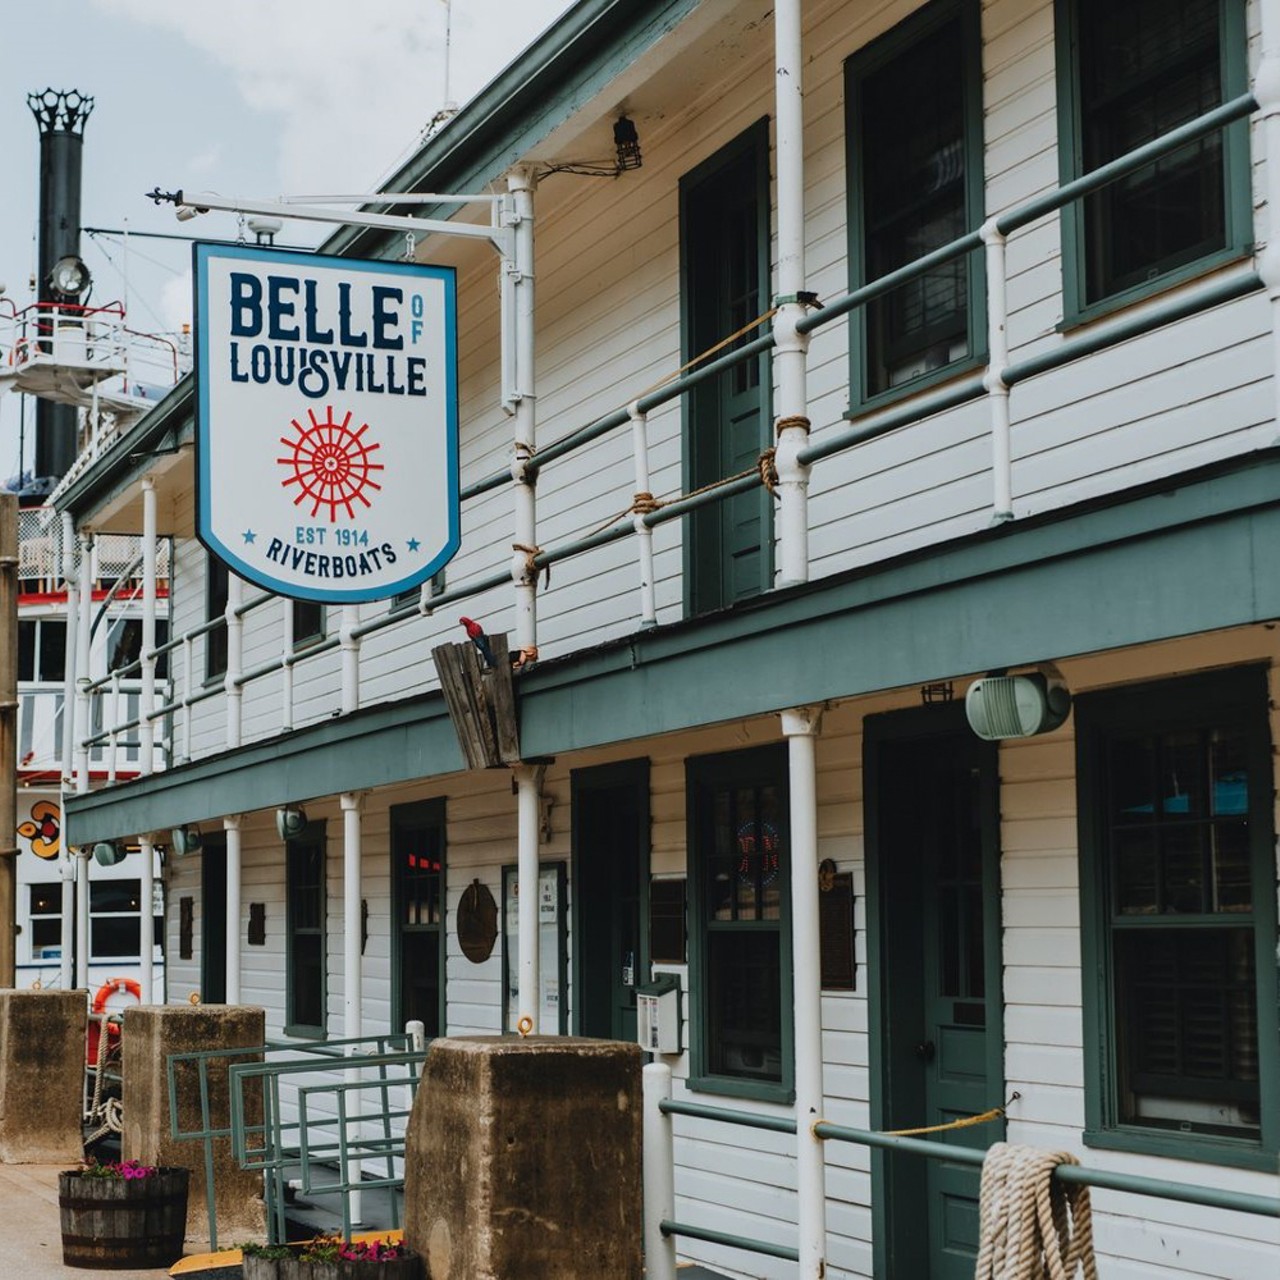 The Belle of Louisville 
402 W. River Rd. 
A ghost was once seen in the boiler room of the Belle of Louisville, believed to be a former captain, Ben Winters, after he died on board. Photo via  Belle of Louisville Riverboats/Facebook 